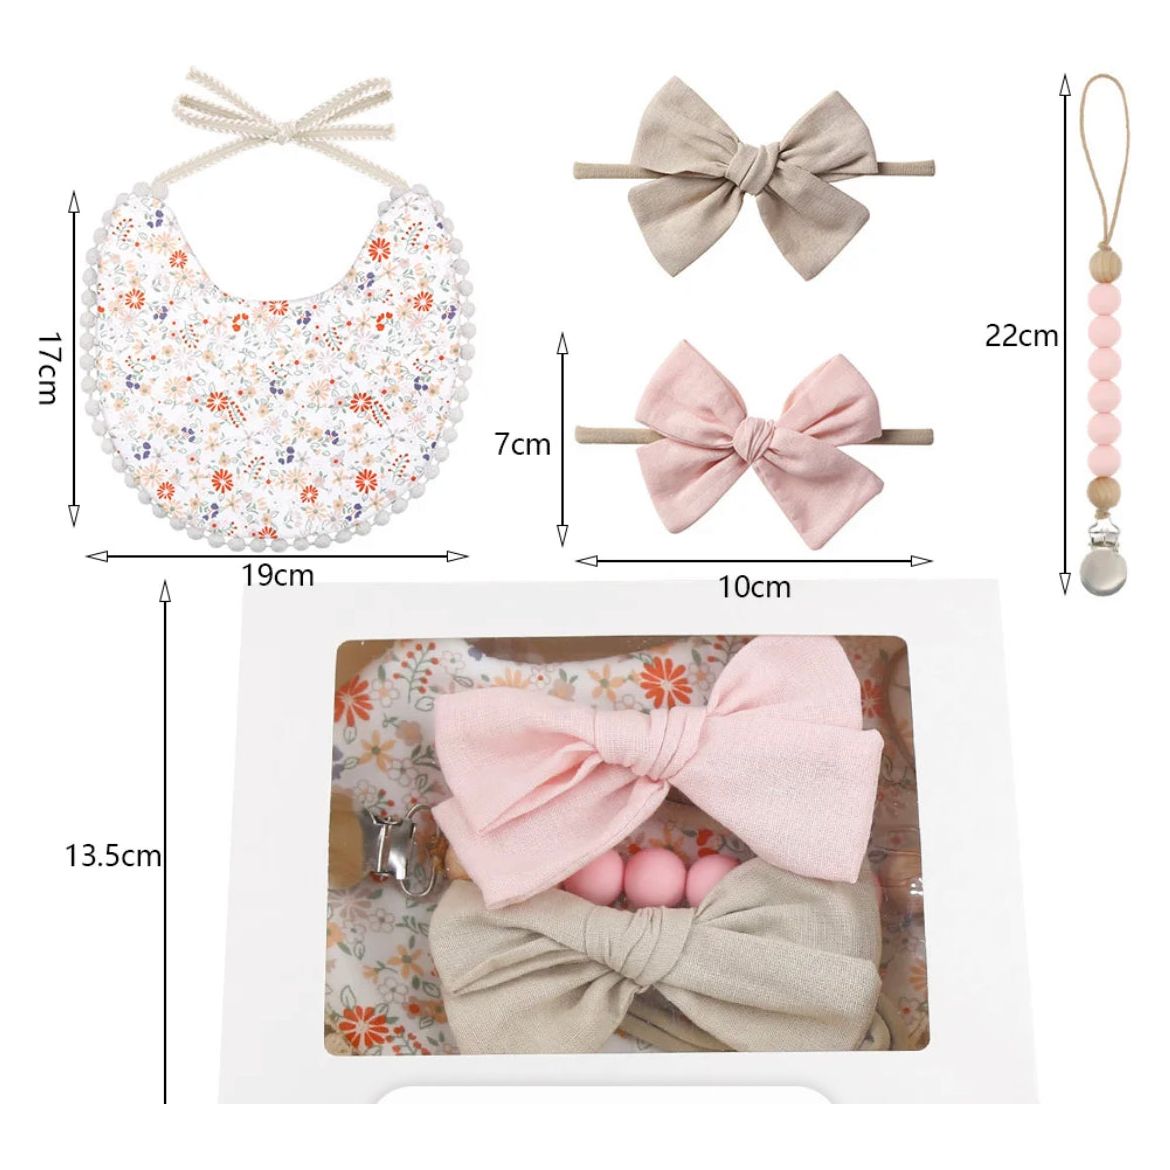 Pibi Infants Gift Set of 4 in a Box (Bib, 2 Bowknot Hairband & Pacifier Clip) Dp059 Assorted Age- Newborn to 12 Months